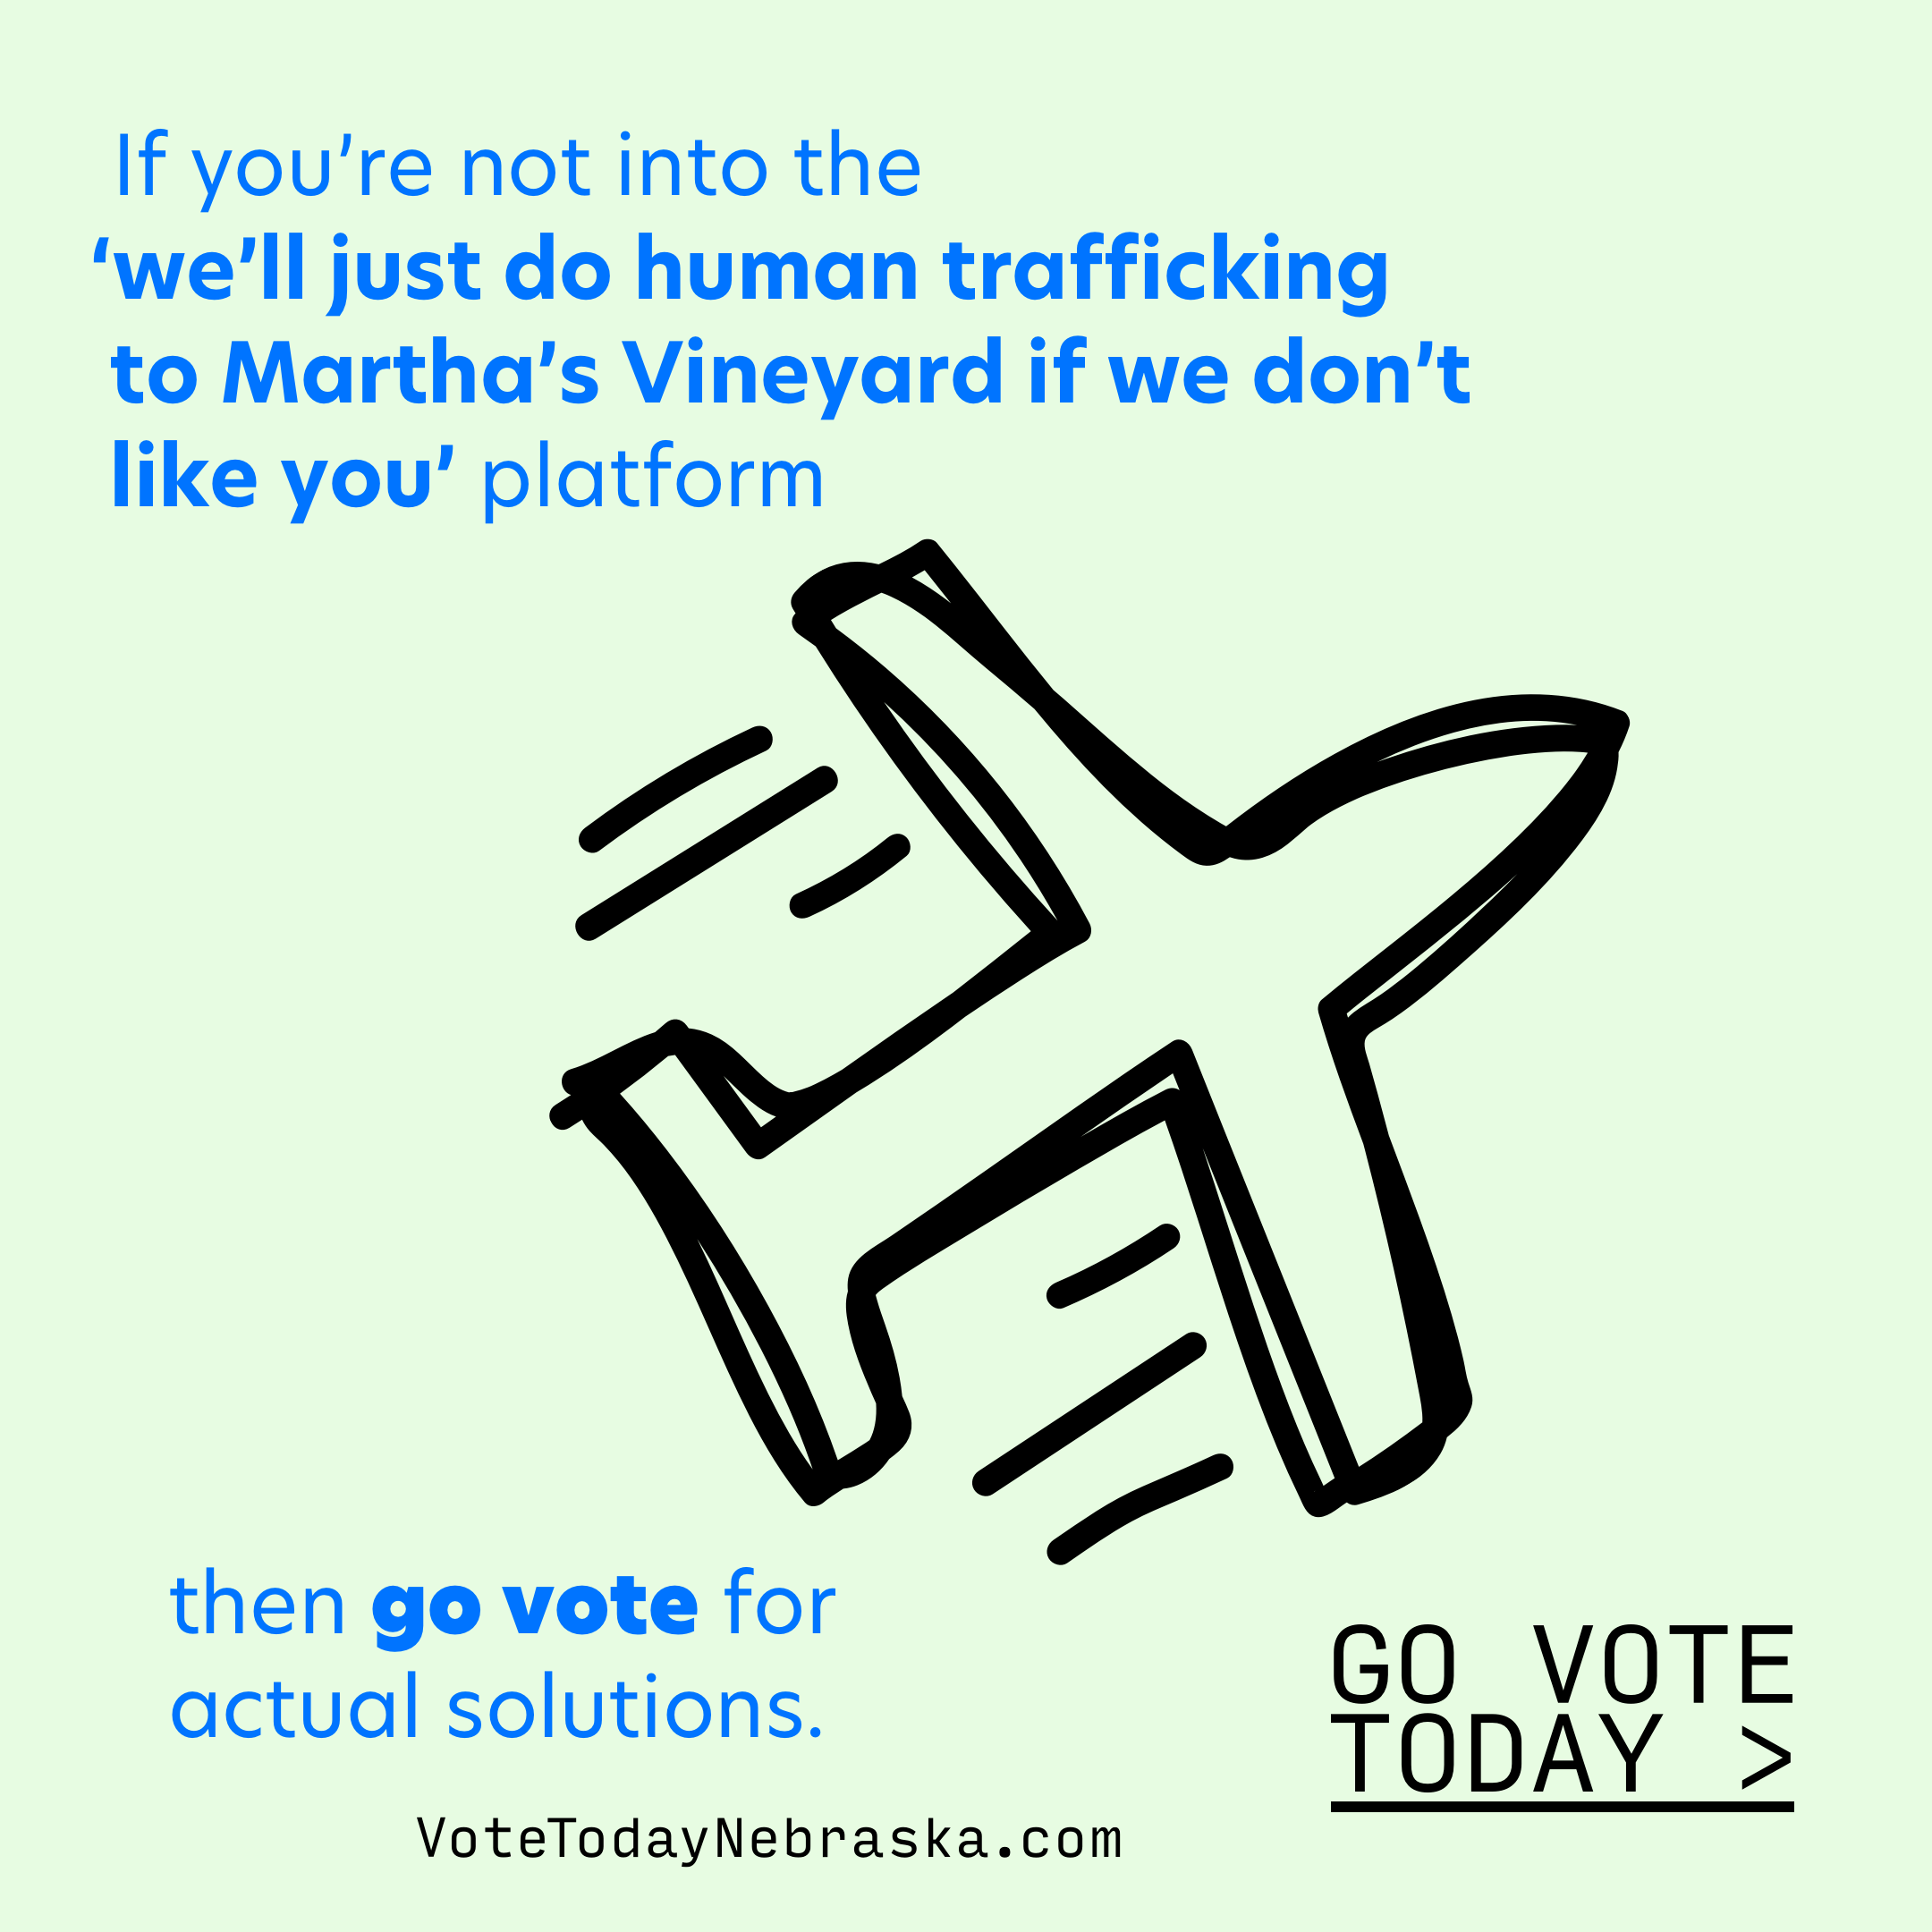 Drawing of a plane flying away. If you're not into the 'we'll just do human trafficking to Martha's Vineyard if we don't like you' platform then go vote for actual solutions. Go Vote Today >